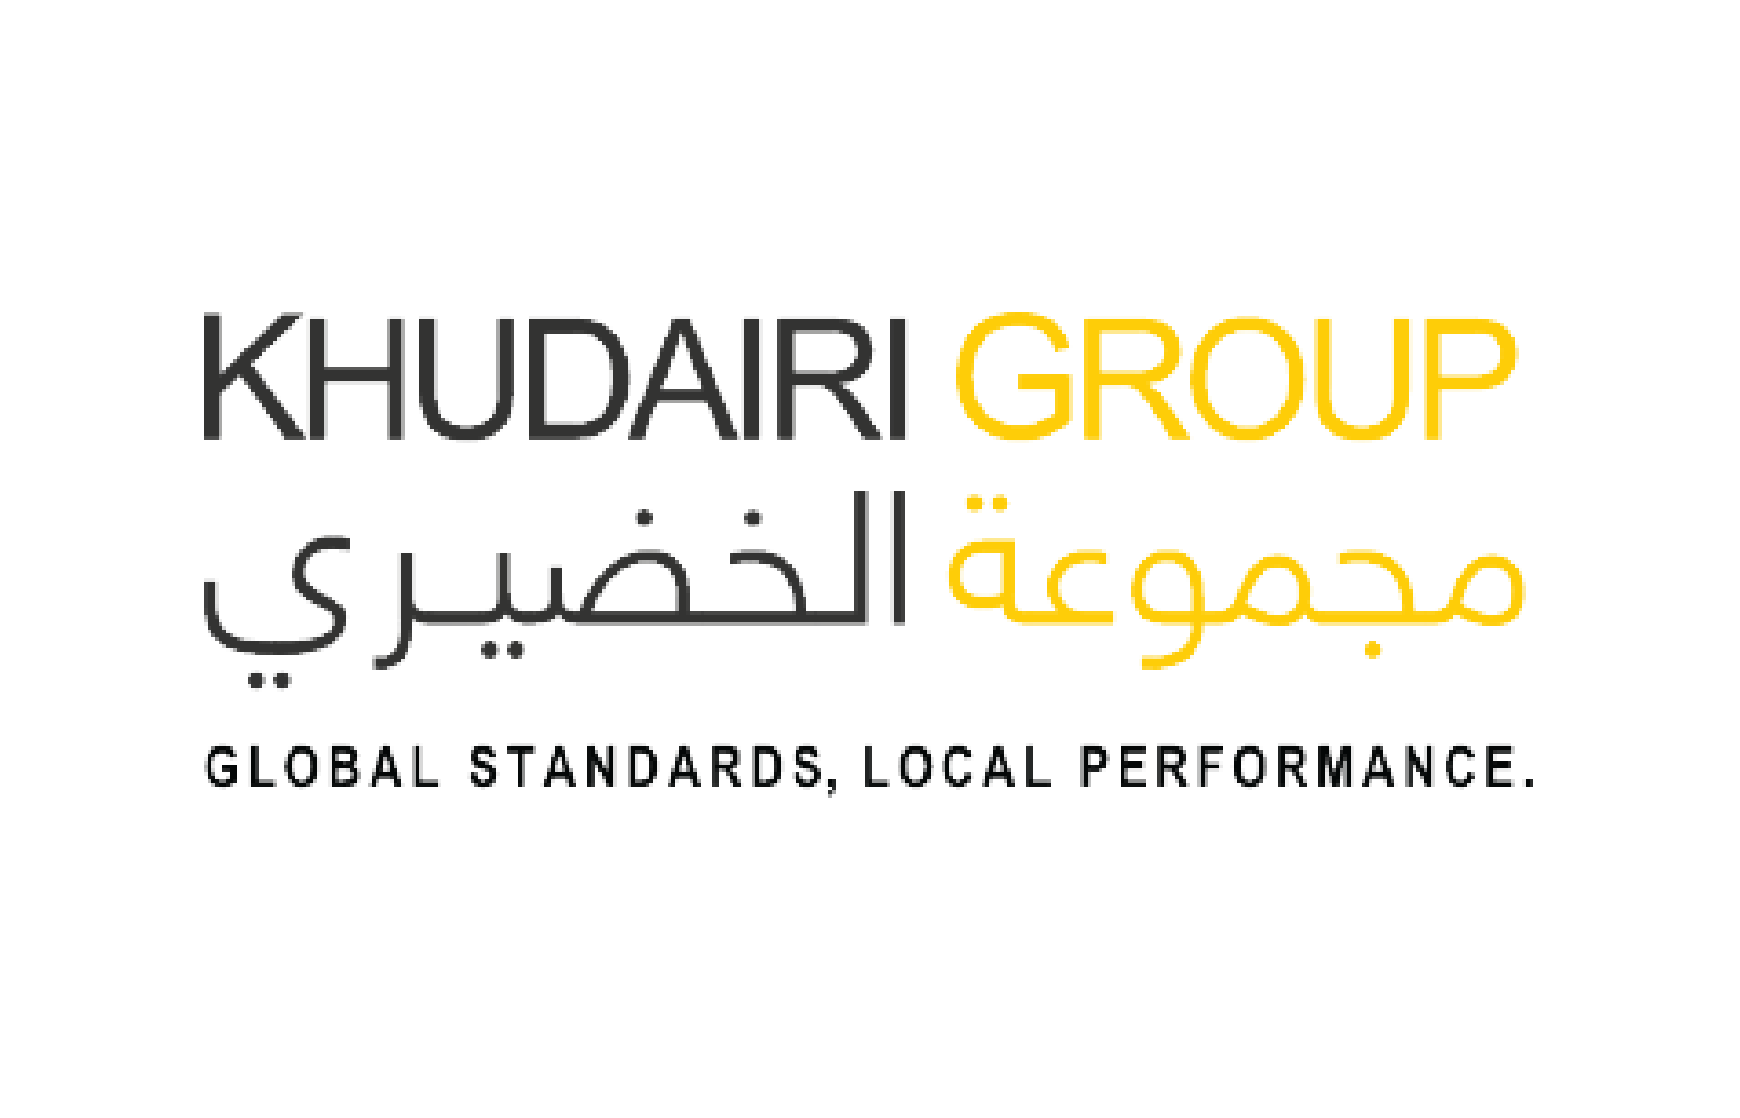 Logo of the company Khudairi group who is a client of Precision Talent Solutions.